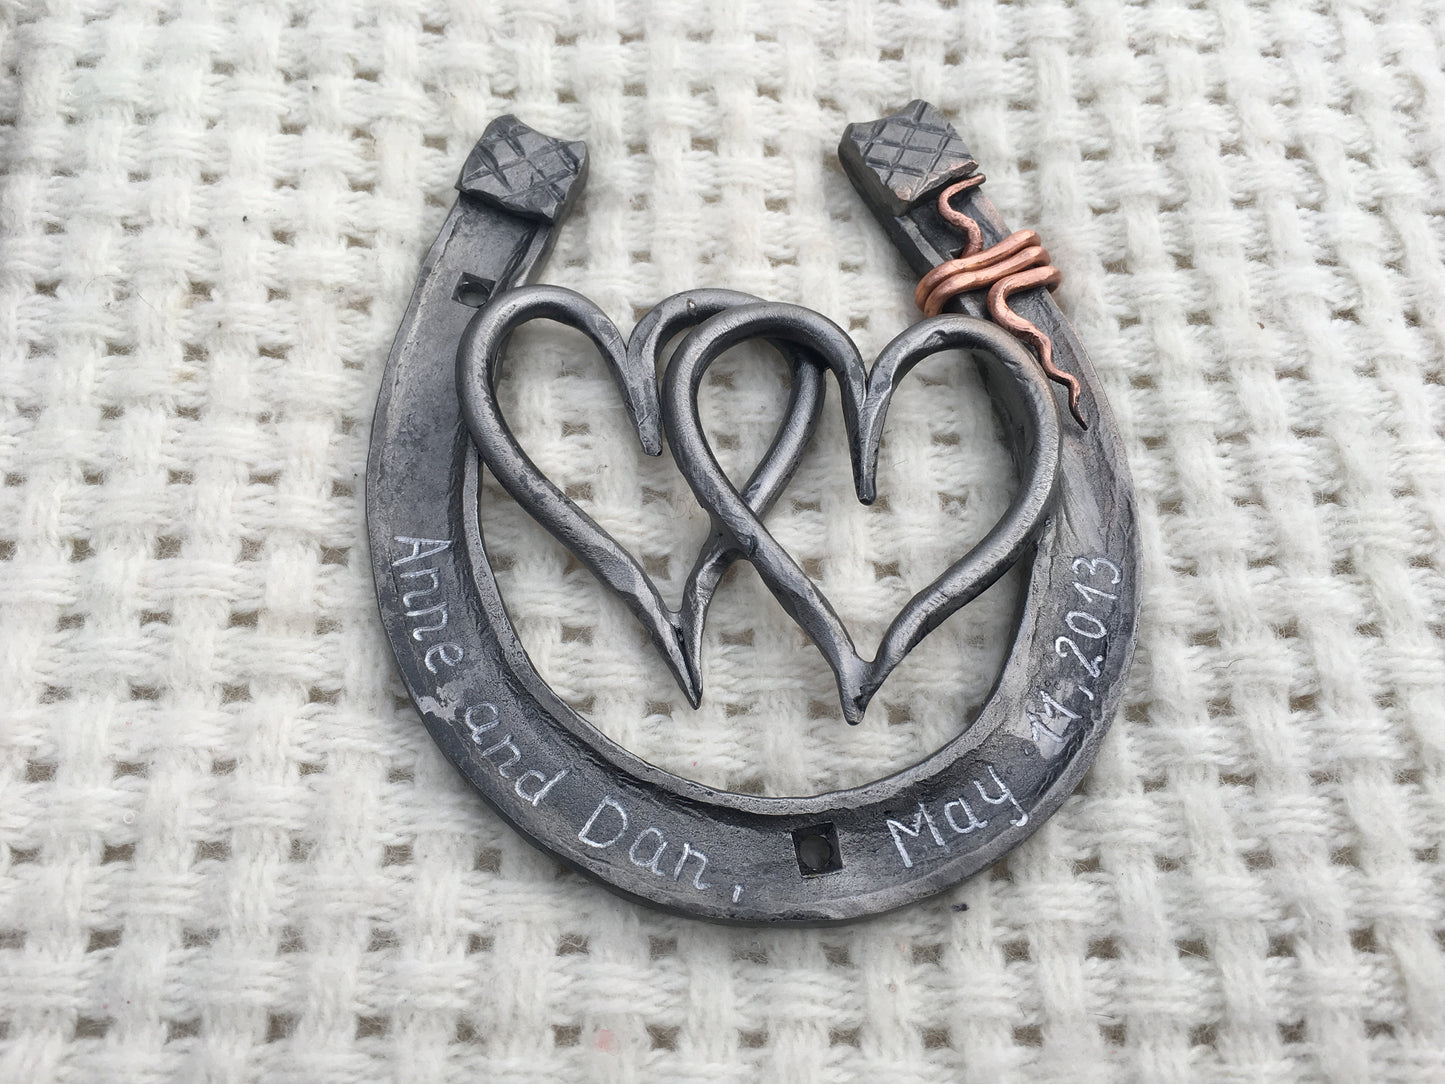 Iron bowl, iron horse shoe, 6th anniversary gift, iron anniversary, 6 year anniversary, iron hearts, iron gift, personalized bowl,steel bowl